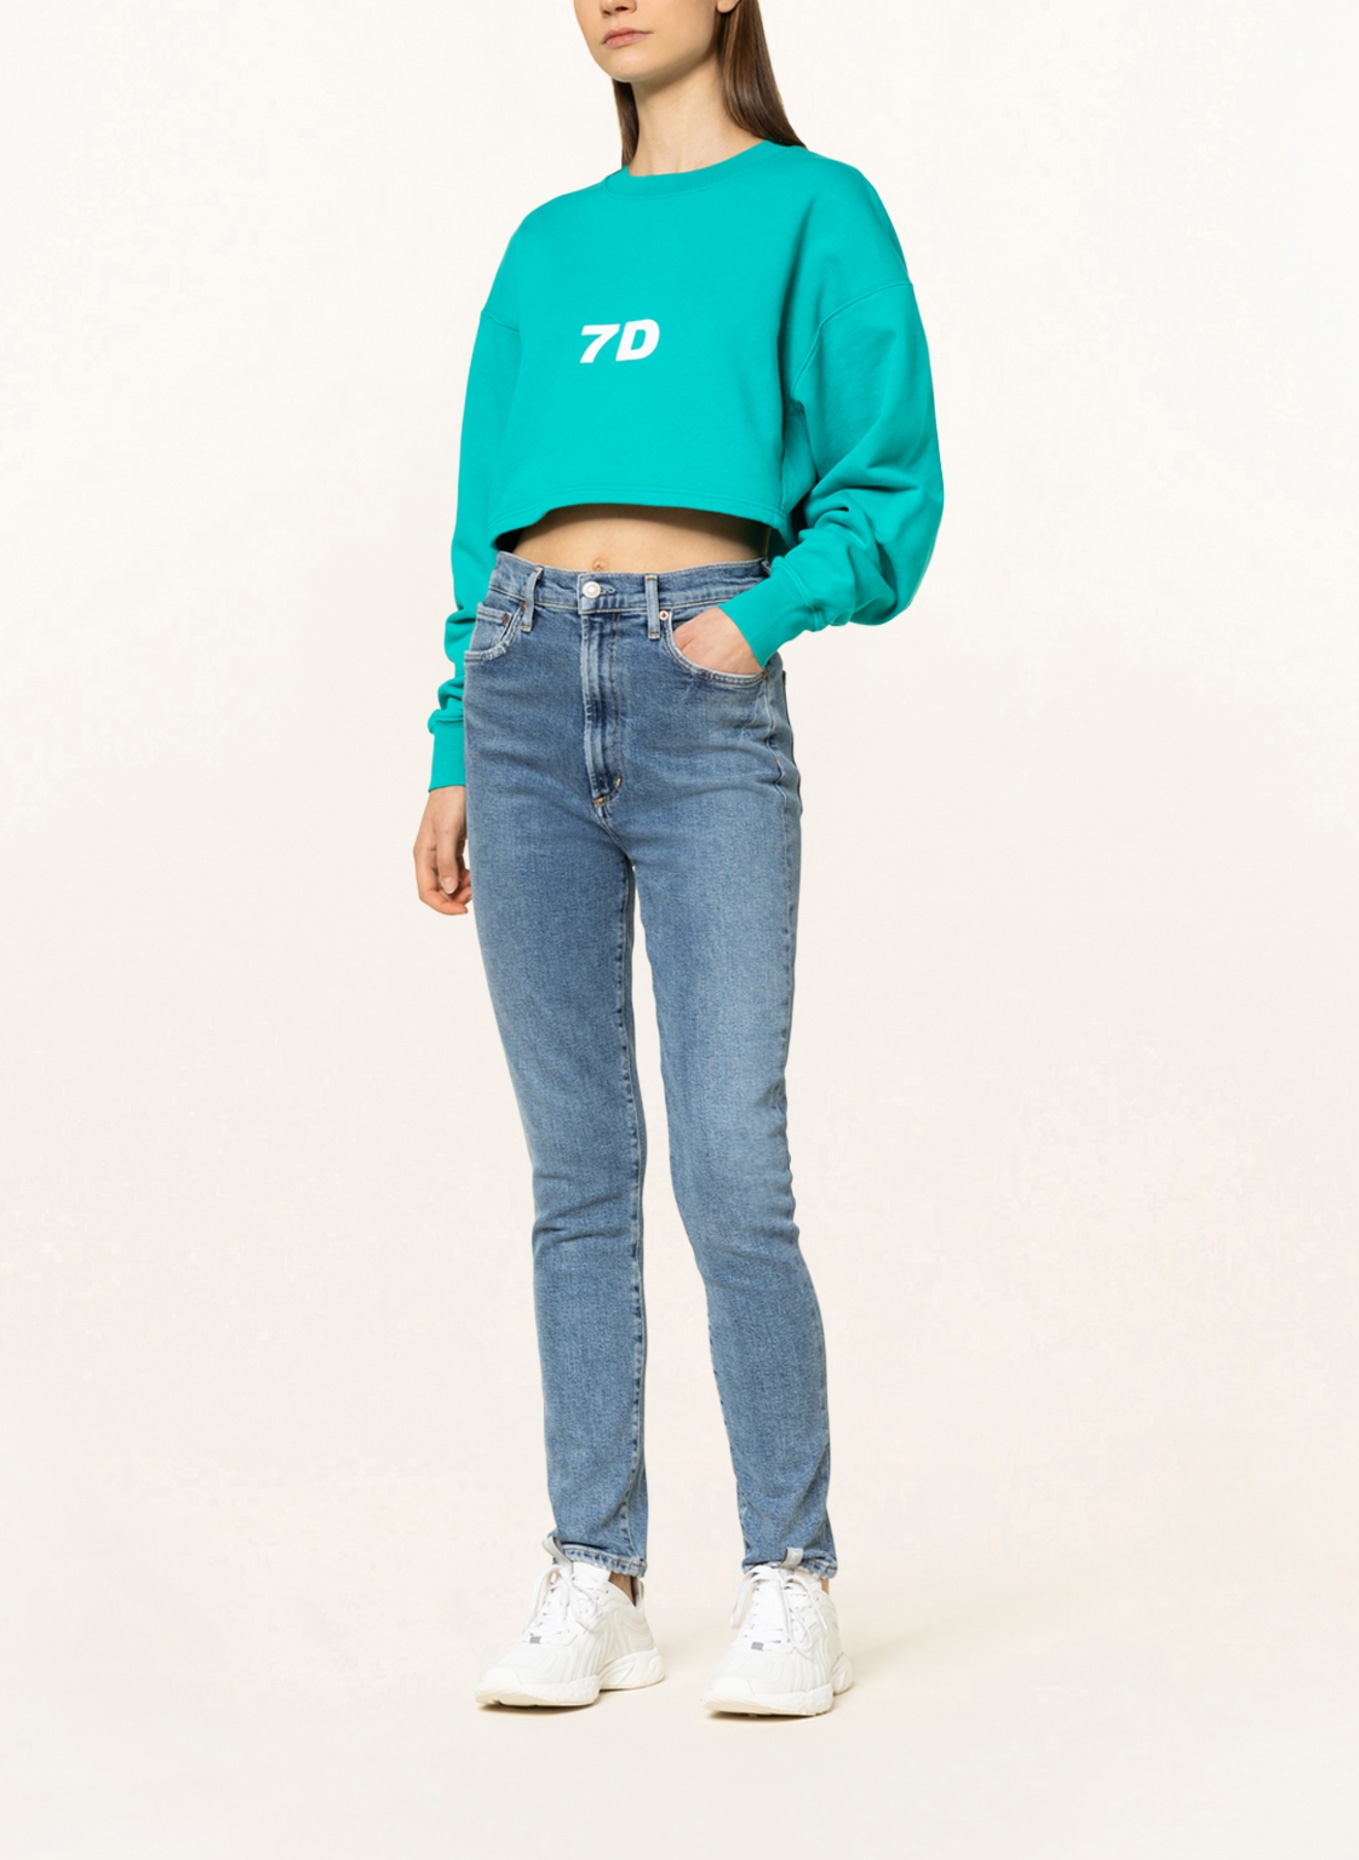 7 DAYS ACTIVE Cropped sweatshirt MONDAY, Color: NEON TURQUOISE (Image 2)